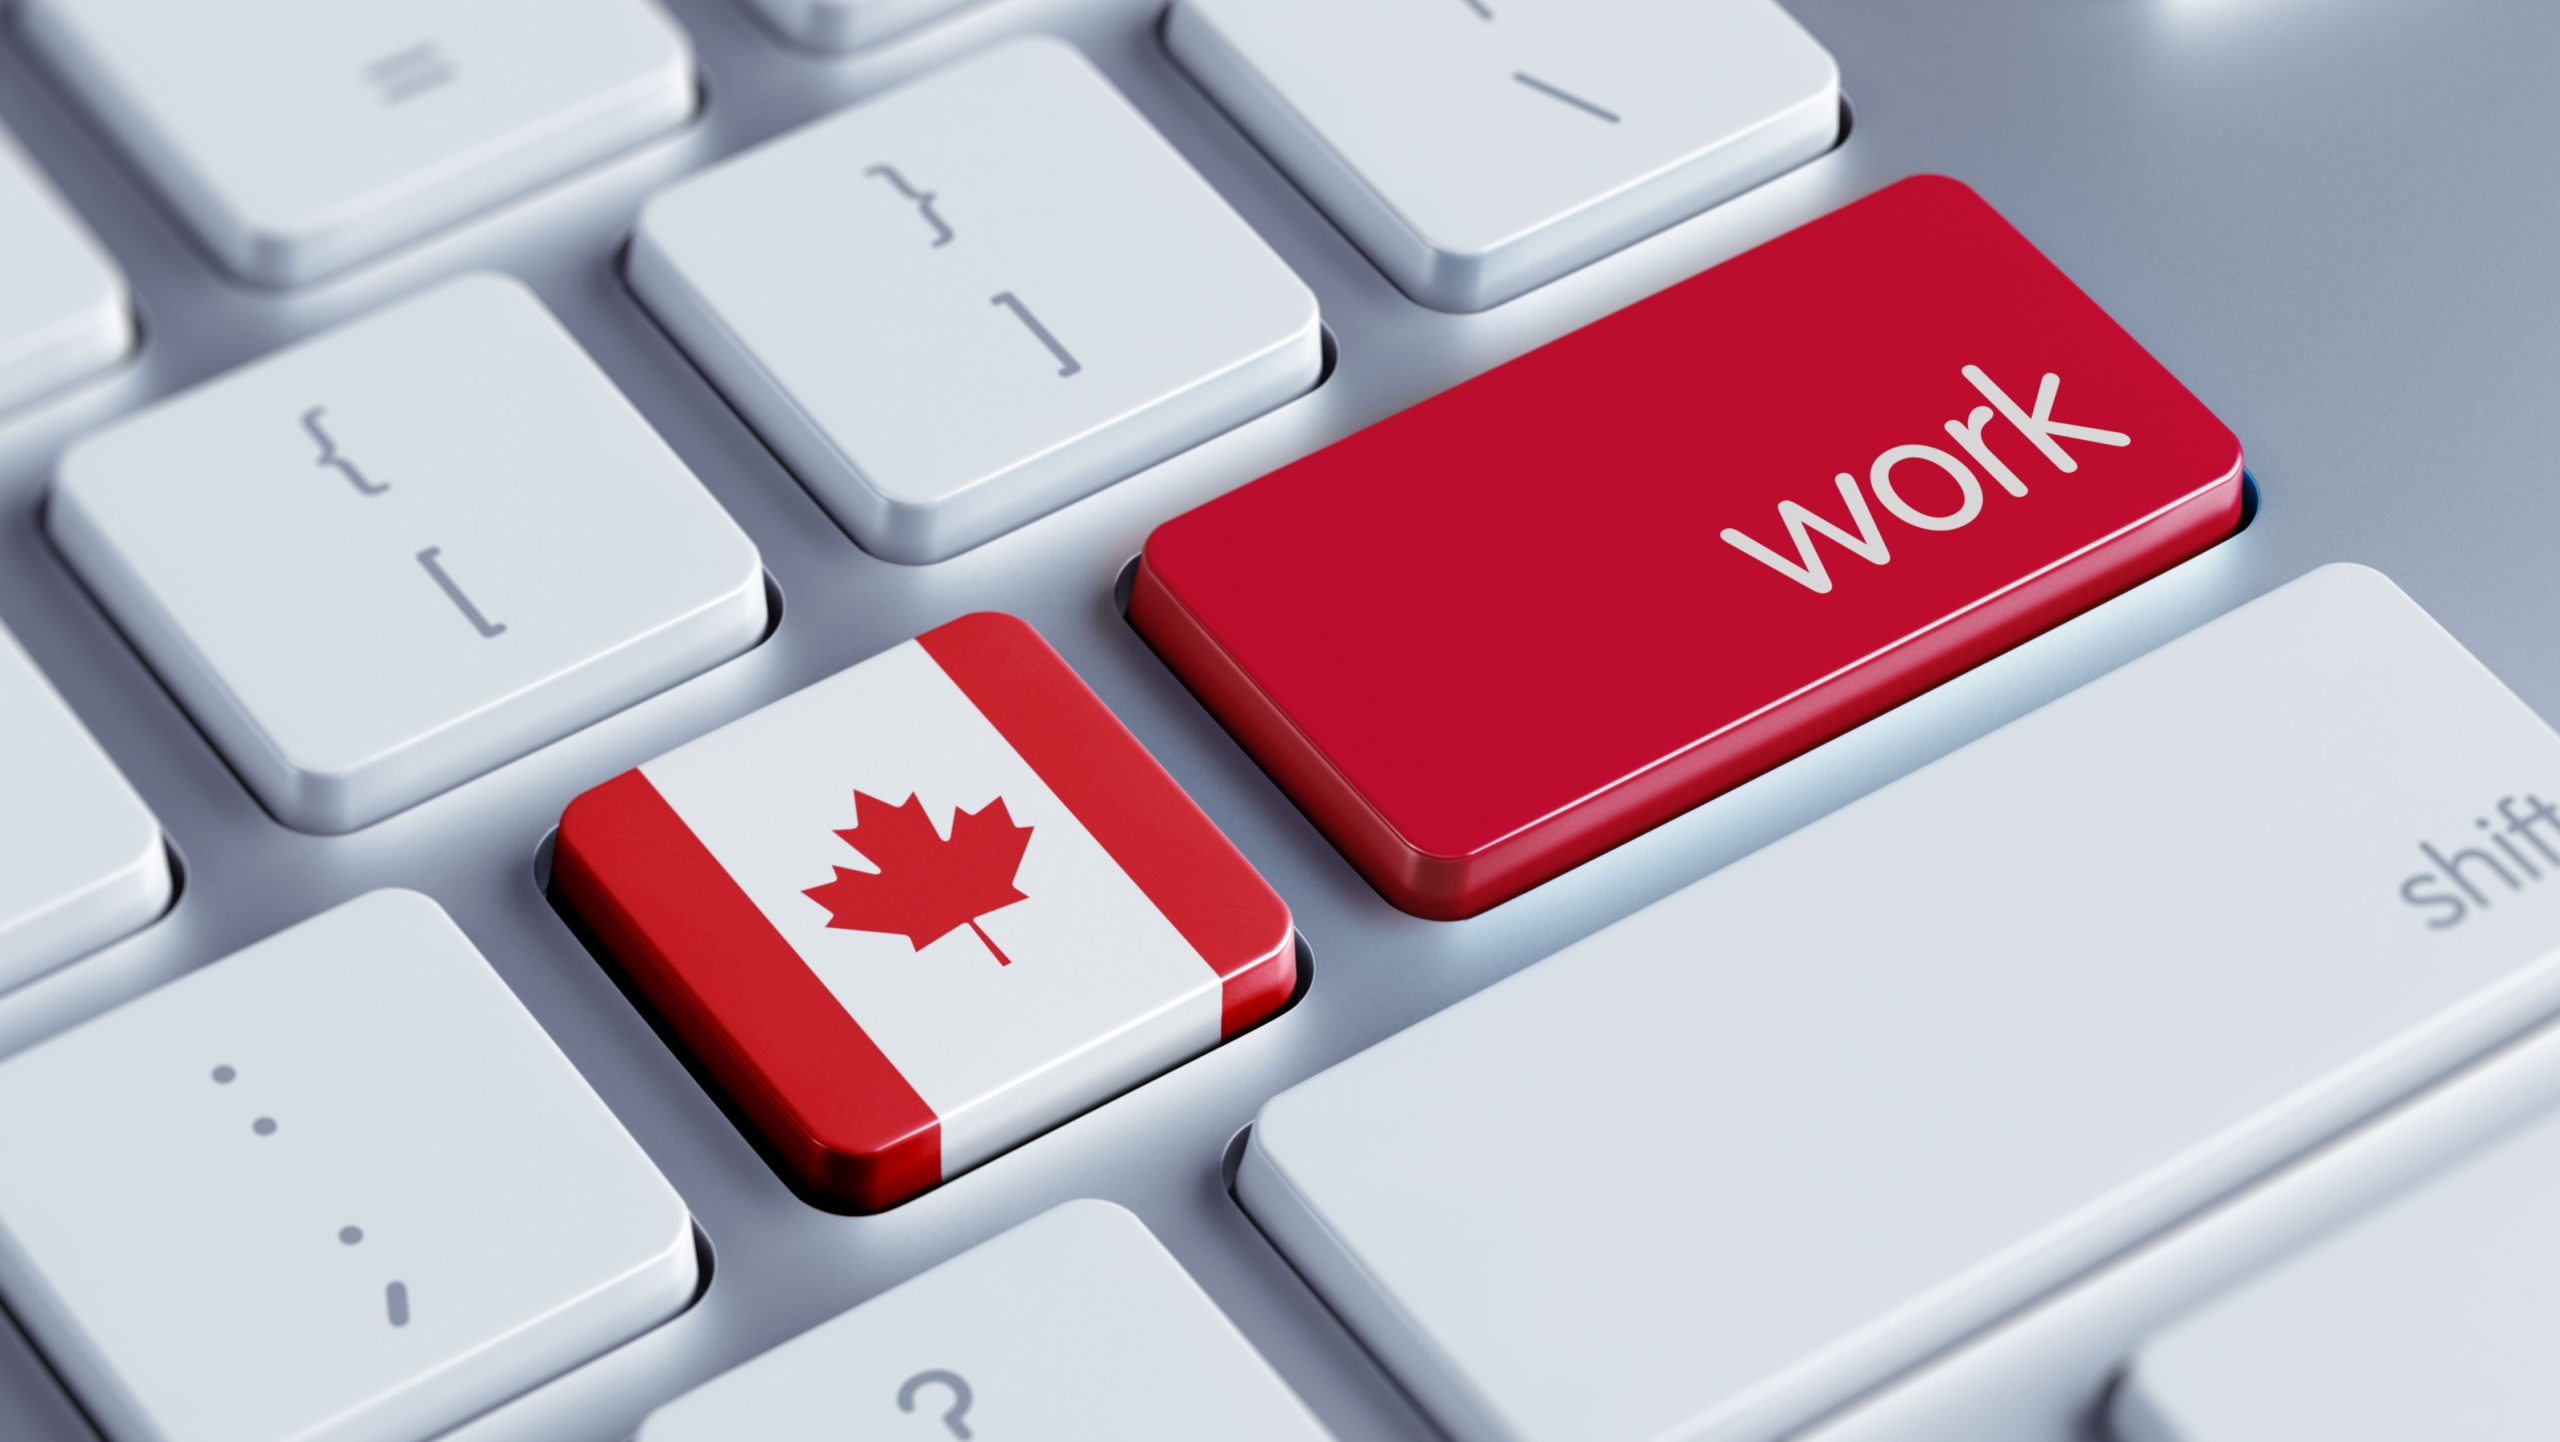 stock market research jobs in canada